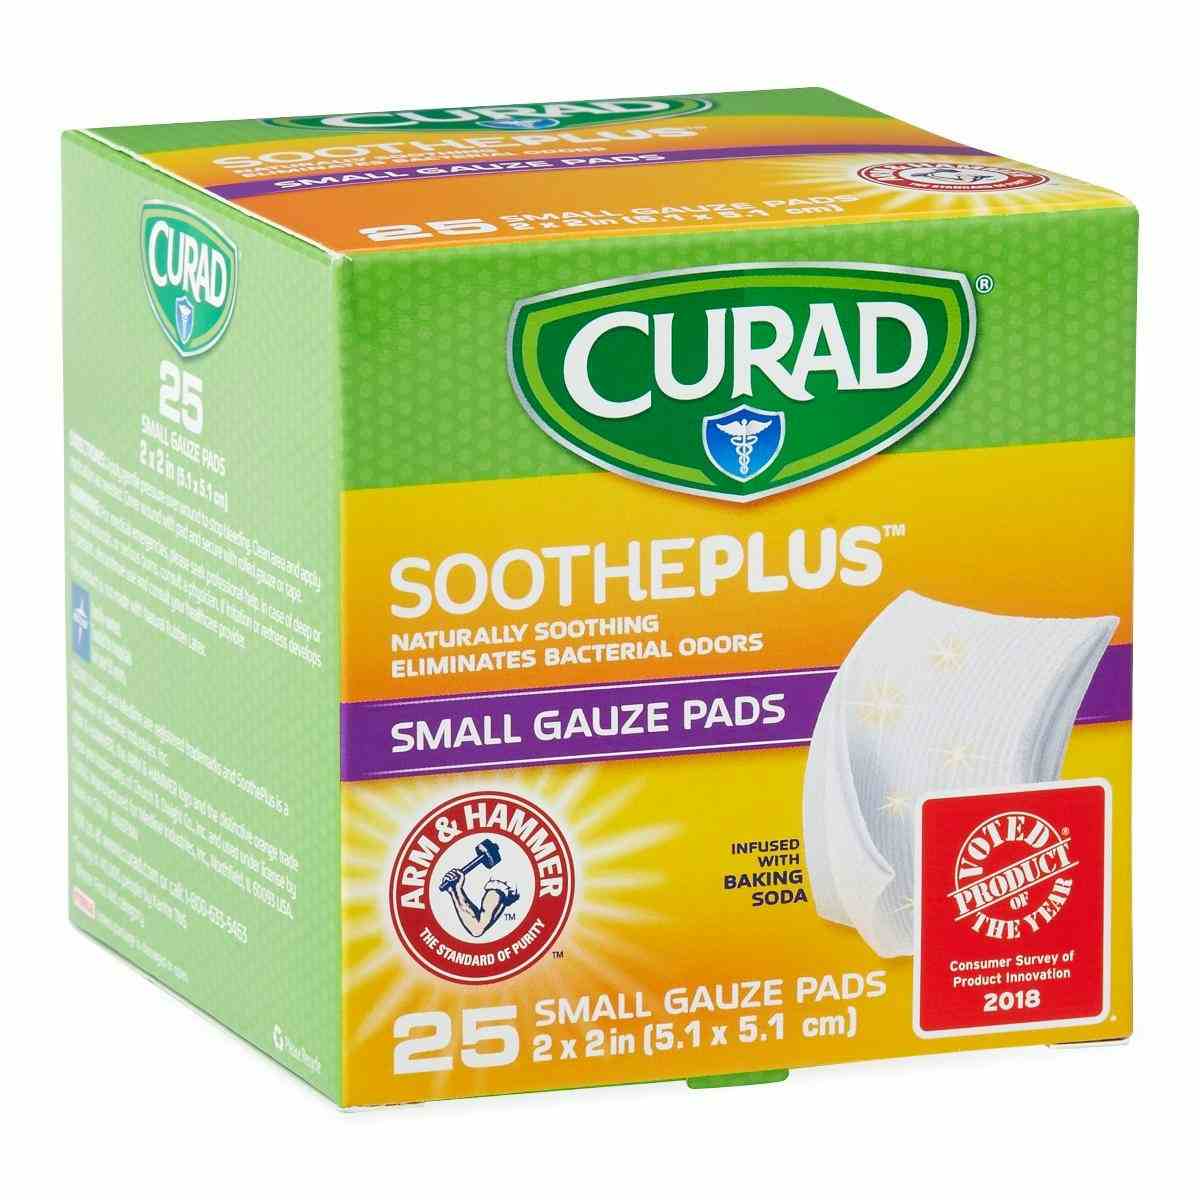 Curad SoothePlus Gauze Pads with Arm and Hammer, CUR202225AH, Small (2" X 2") - Case of 25 